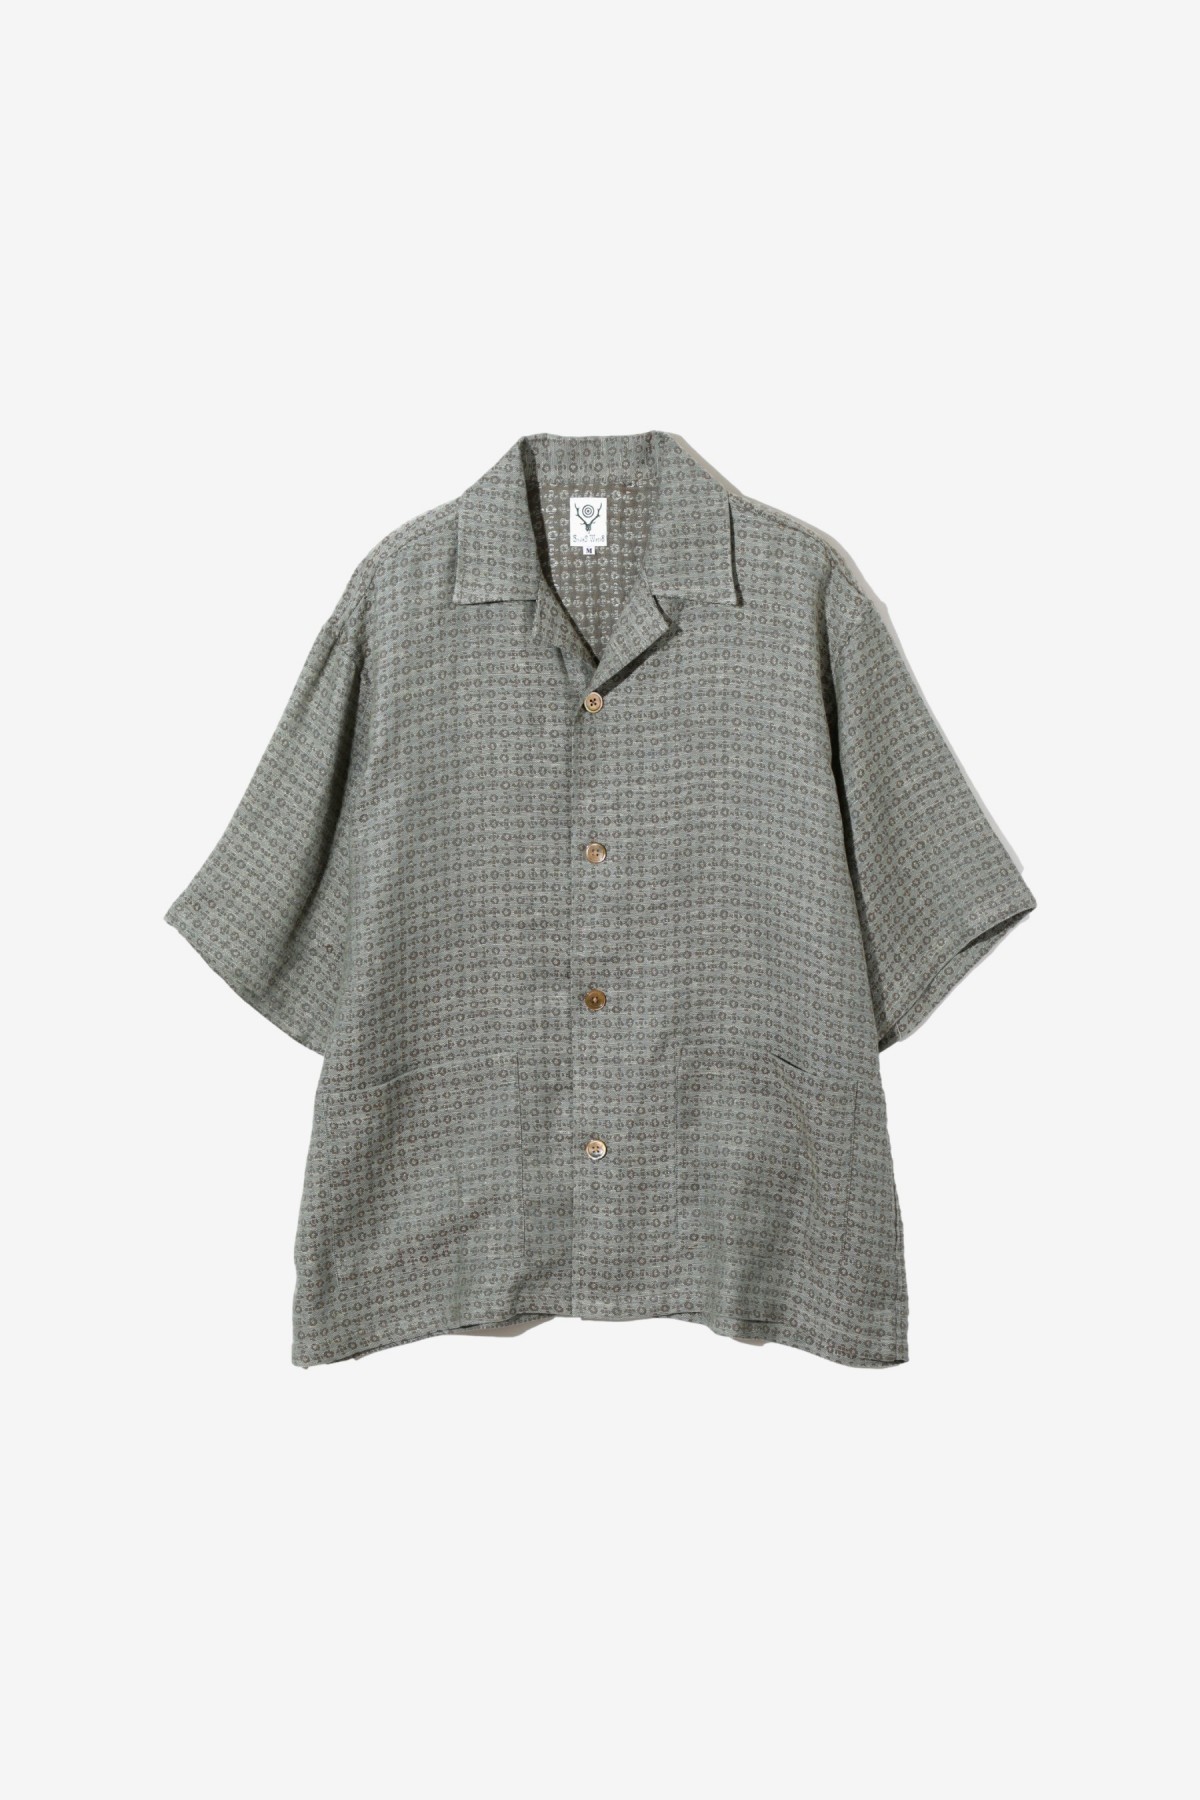 South2 West8 Cabana Shirt in Blue Grey